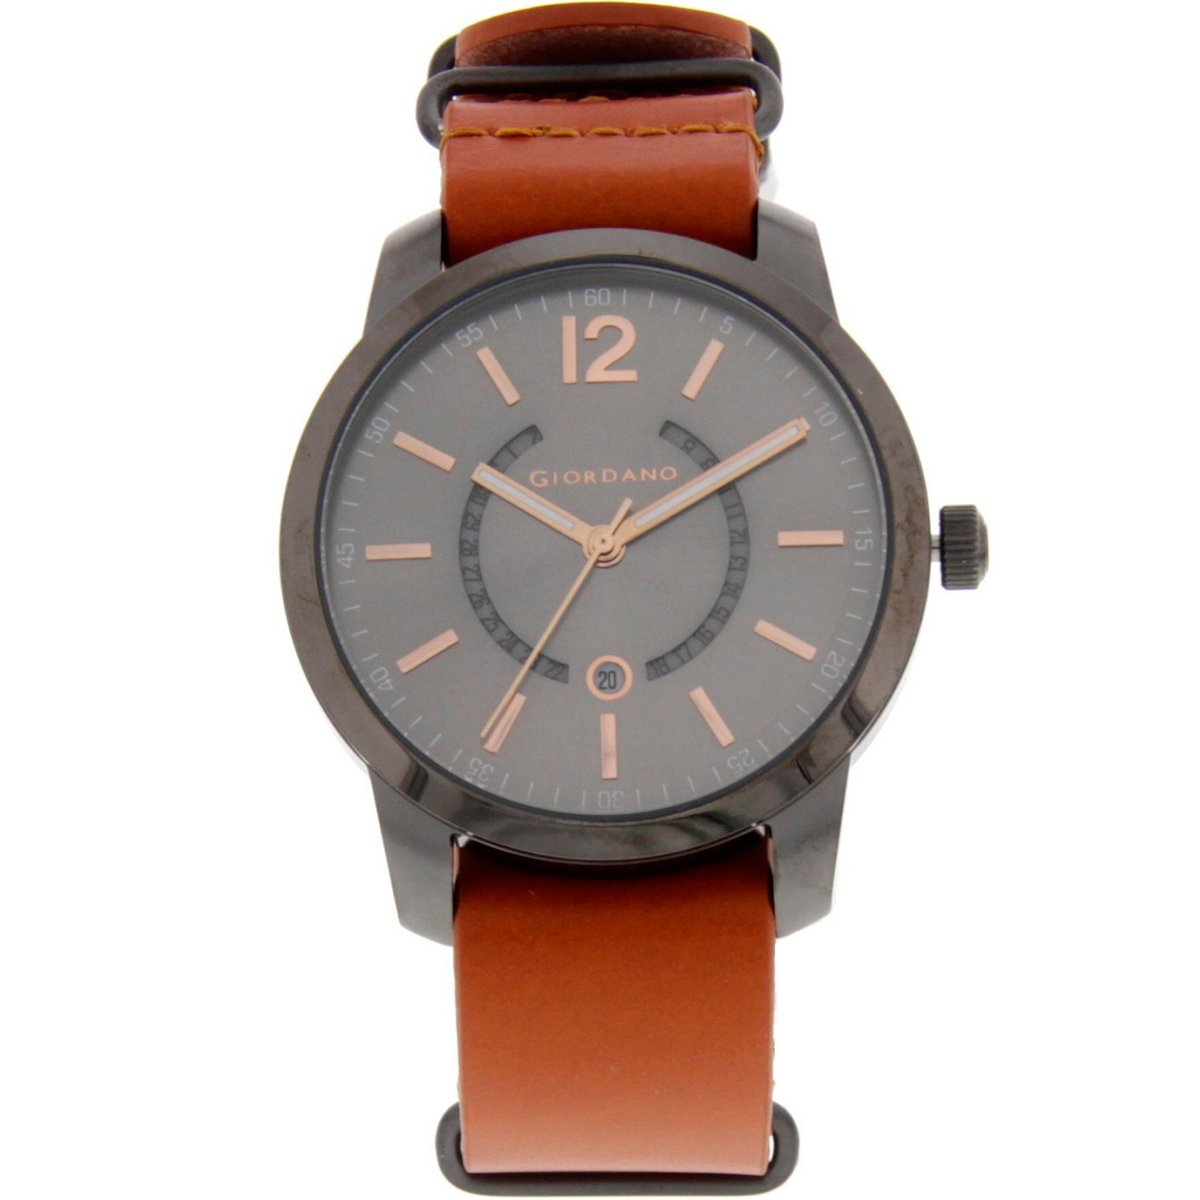 Giordano Men's Analog Watch Brown Strap With Grey Dial 1791-00